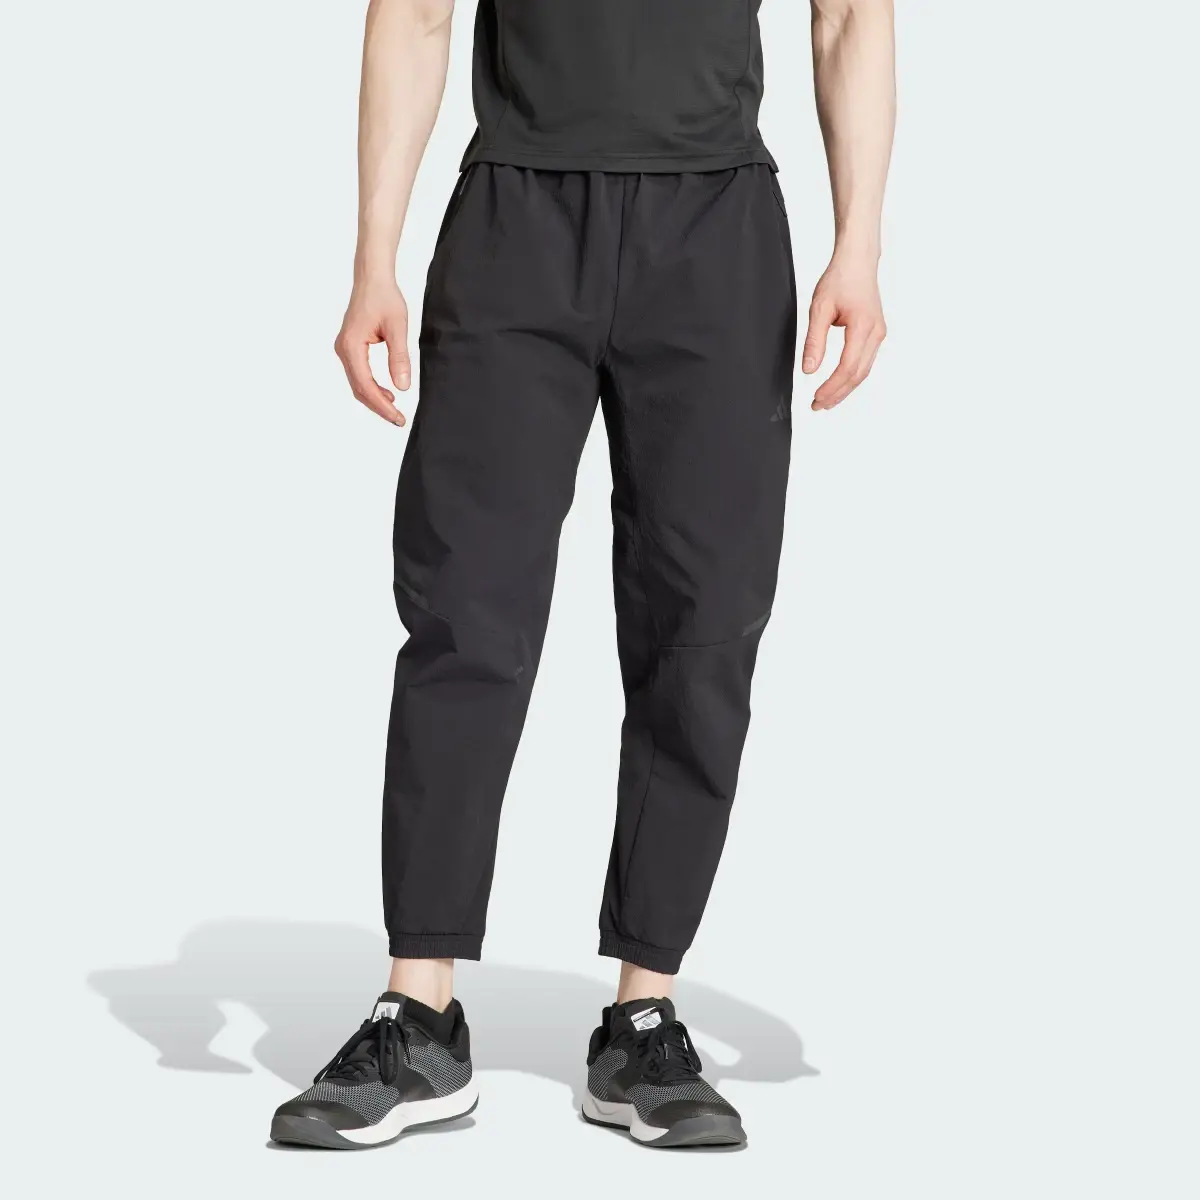 Adidas Designed for Training Workout Pants. 1